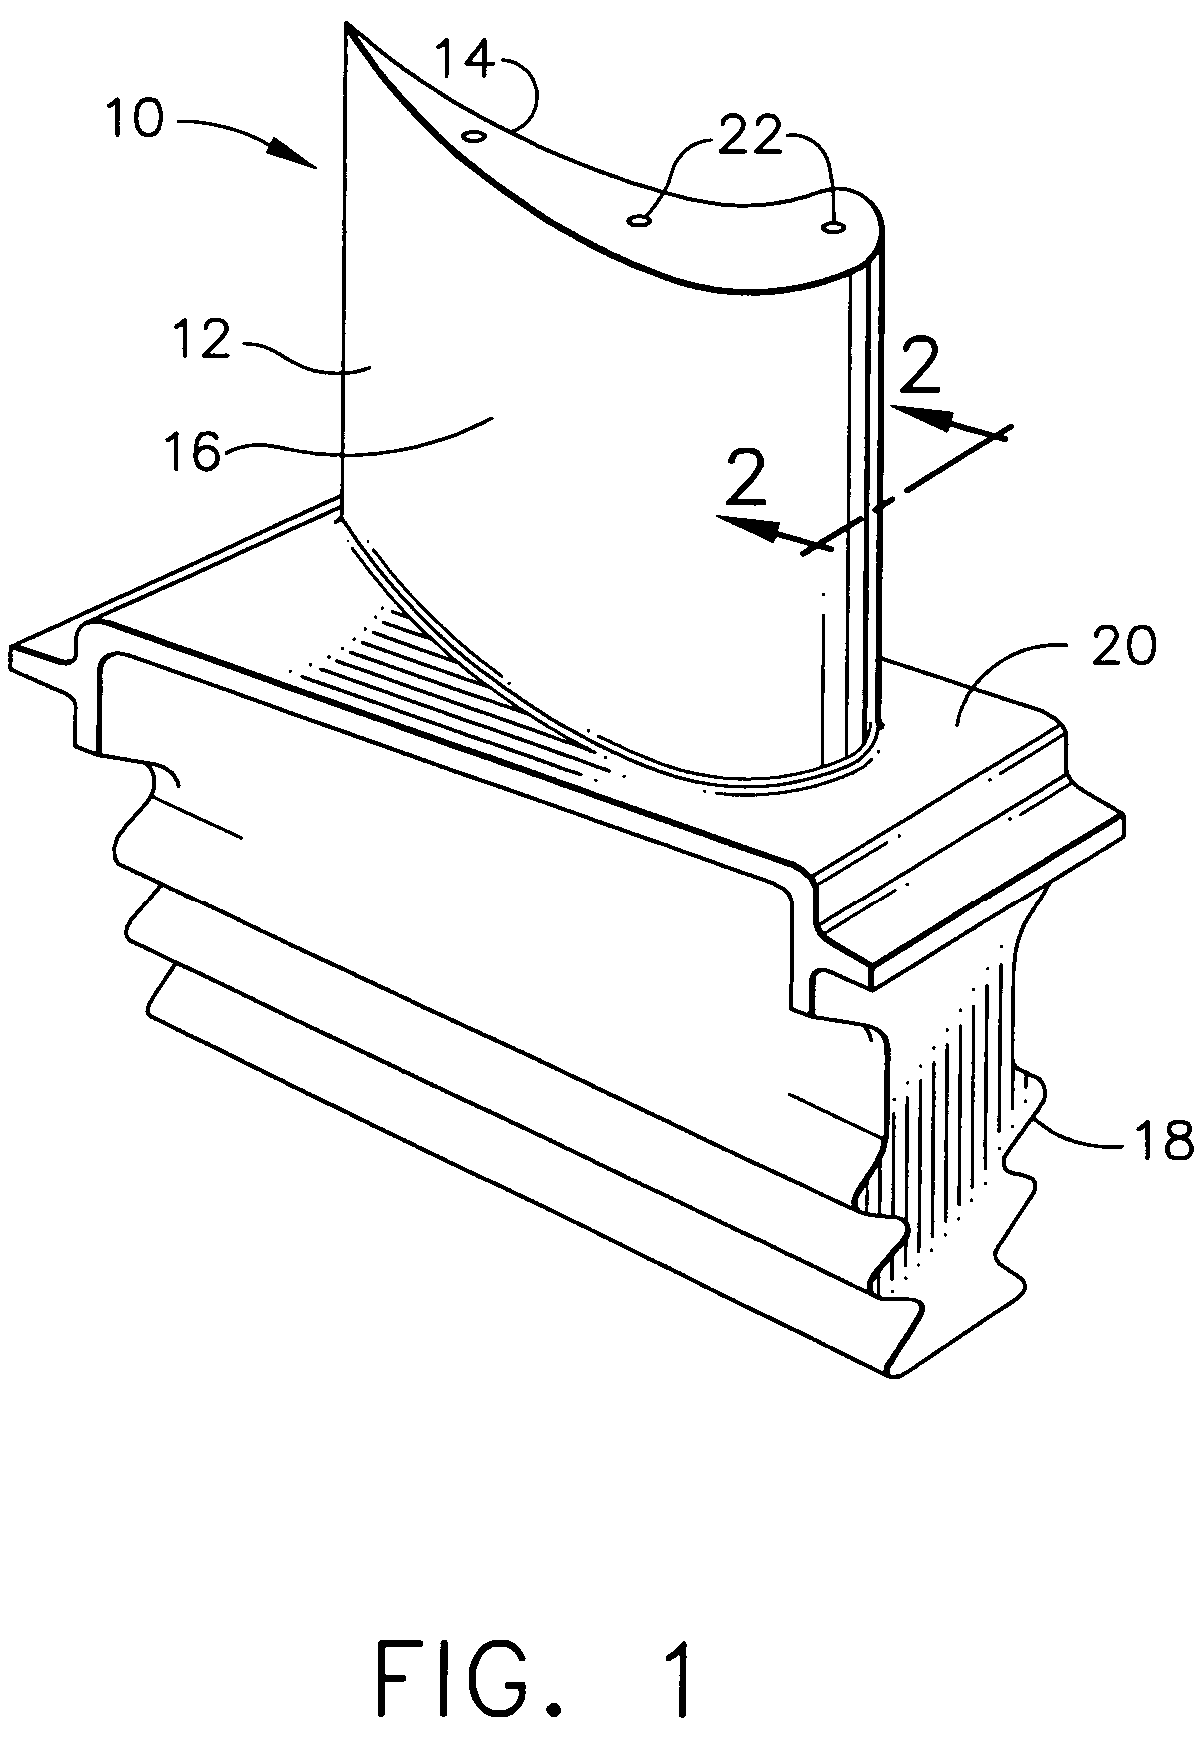 Bond coat for silicon-containing substrate for EBC and processes for preparing same